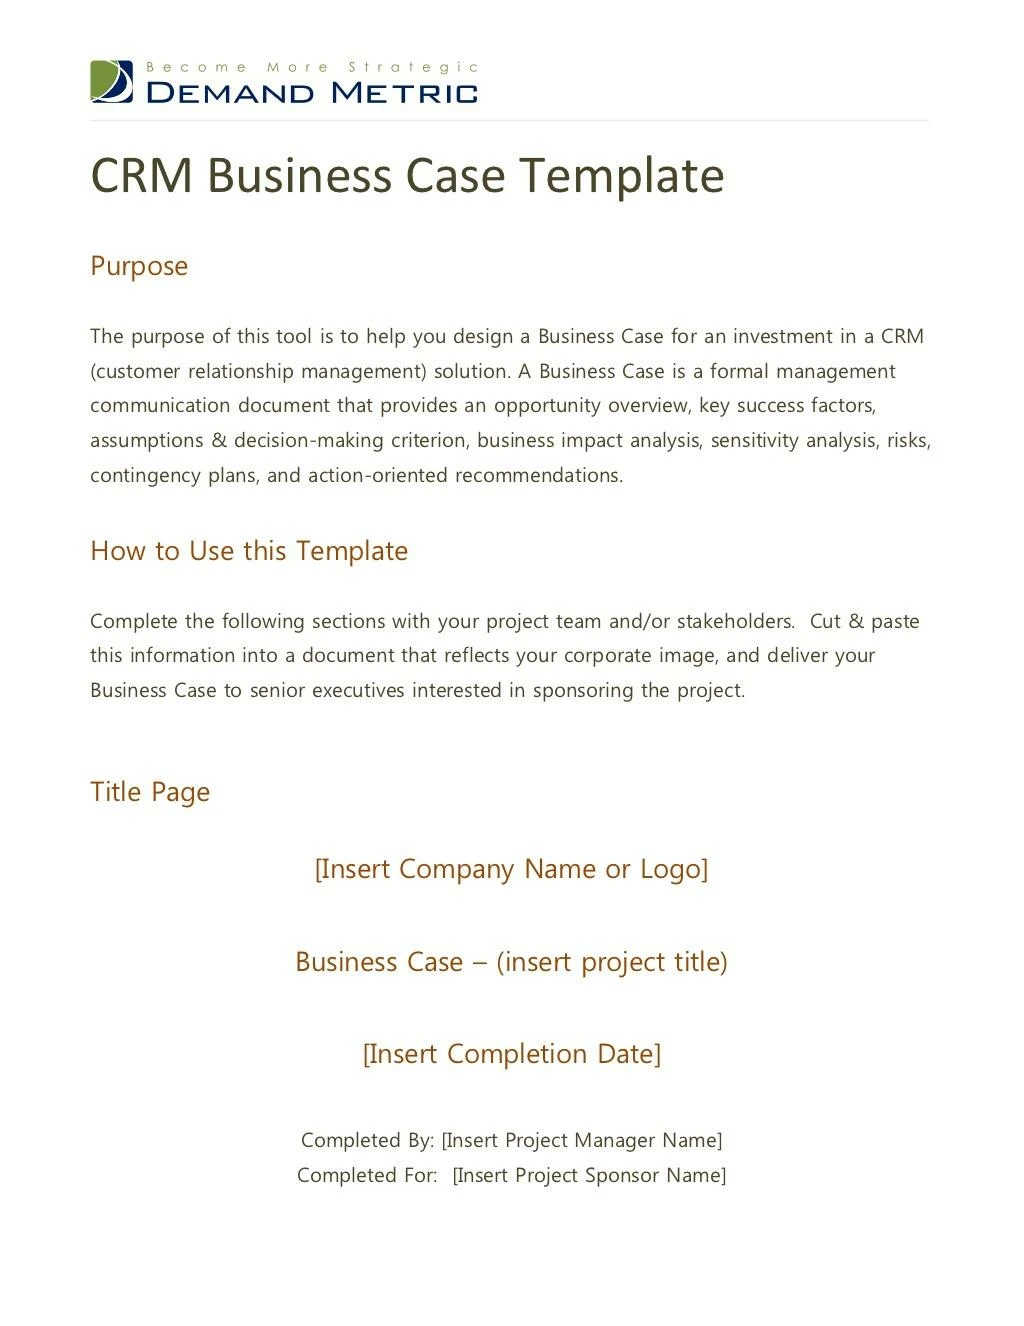 crm business case template